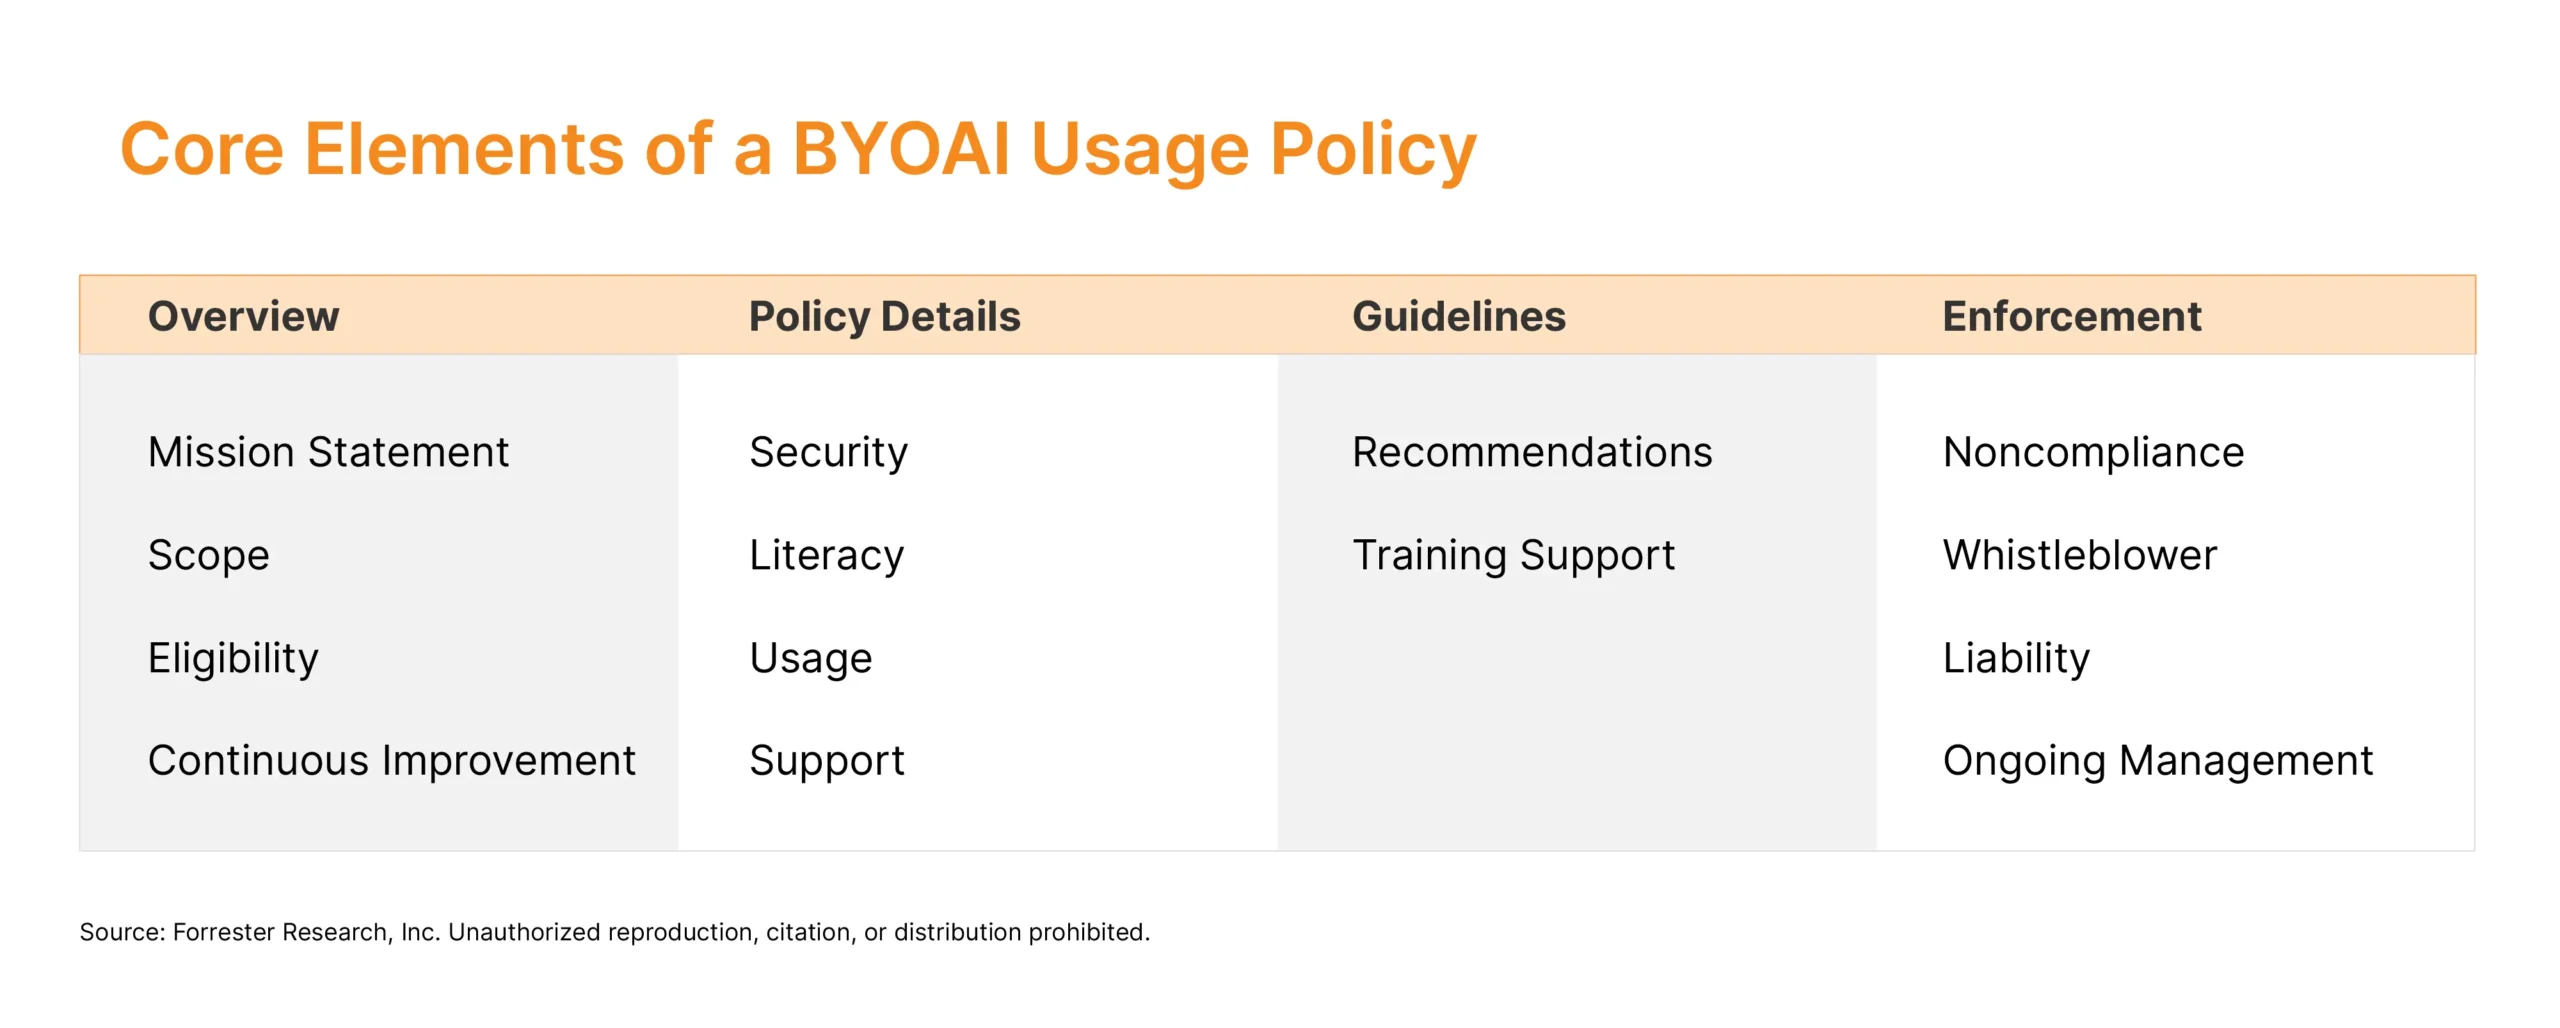 Core Elements of a BYOAI Usage Policy